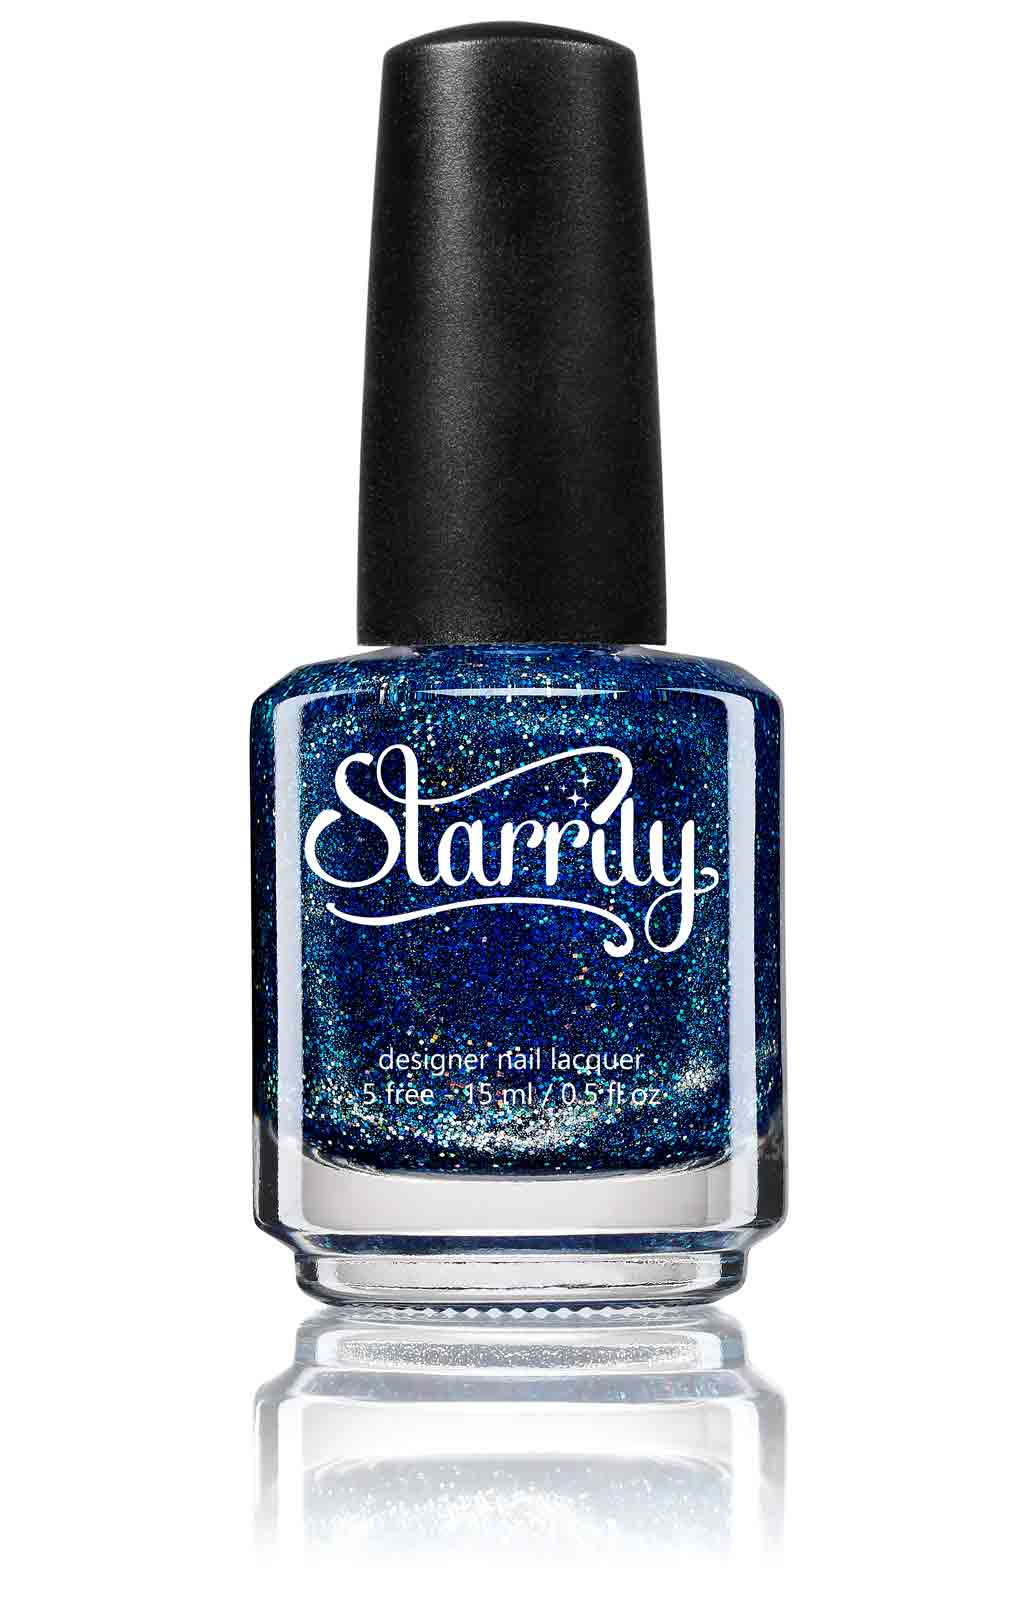 Starrily Bioluminescence - Rich sapphire blue with holographic glitter and a holo effect. High quality nail polish. Made in the USA! Cruelty Free and Vegan.